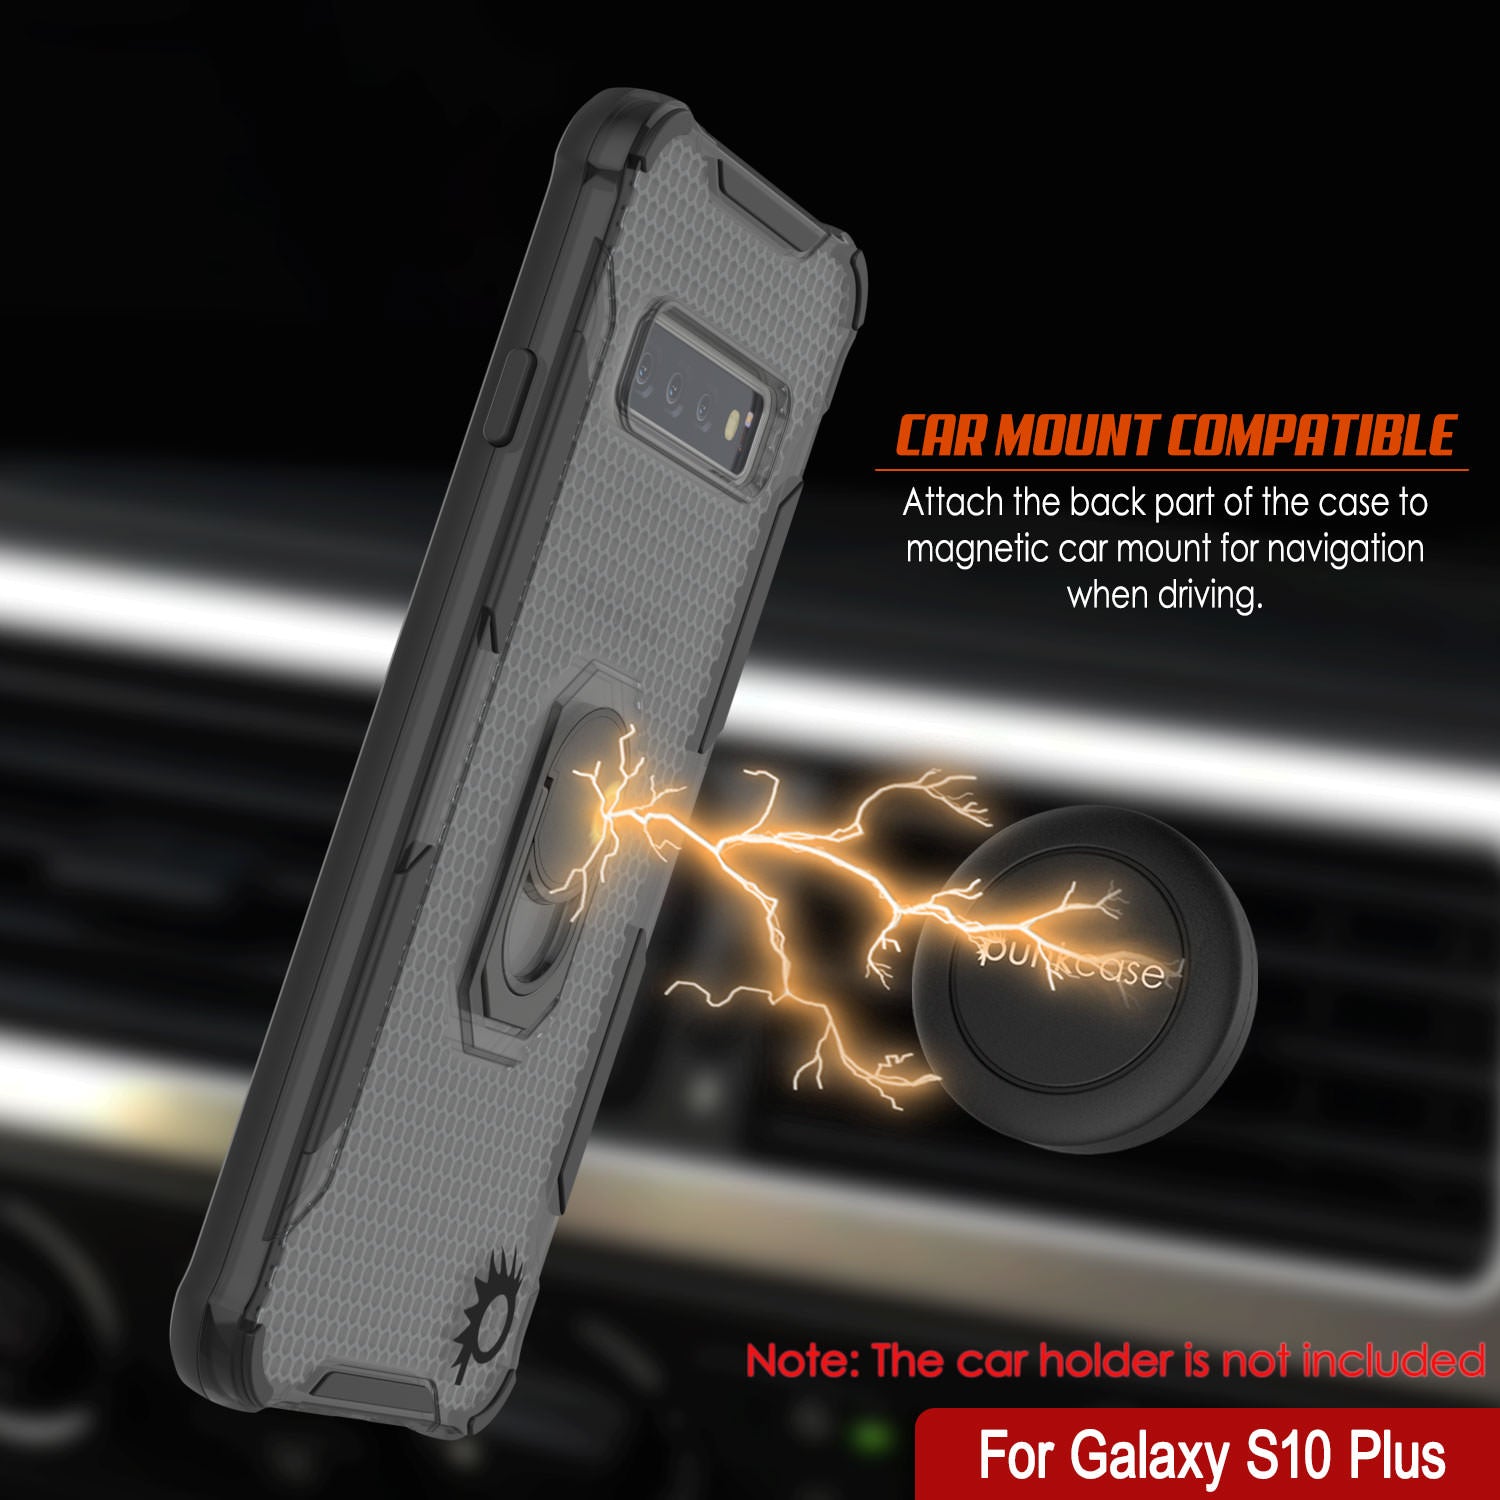 Punkcase Galaxy S10 Plus Case [Magnetix 2.0 Series] Clear Protective TPU Cover W/Kickstand [Black]